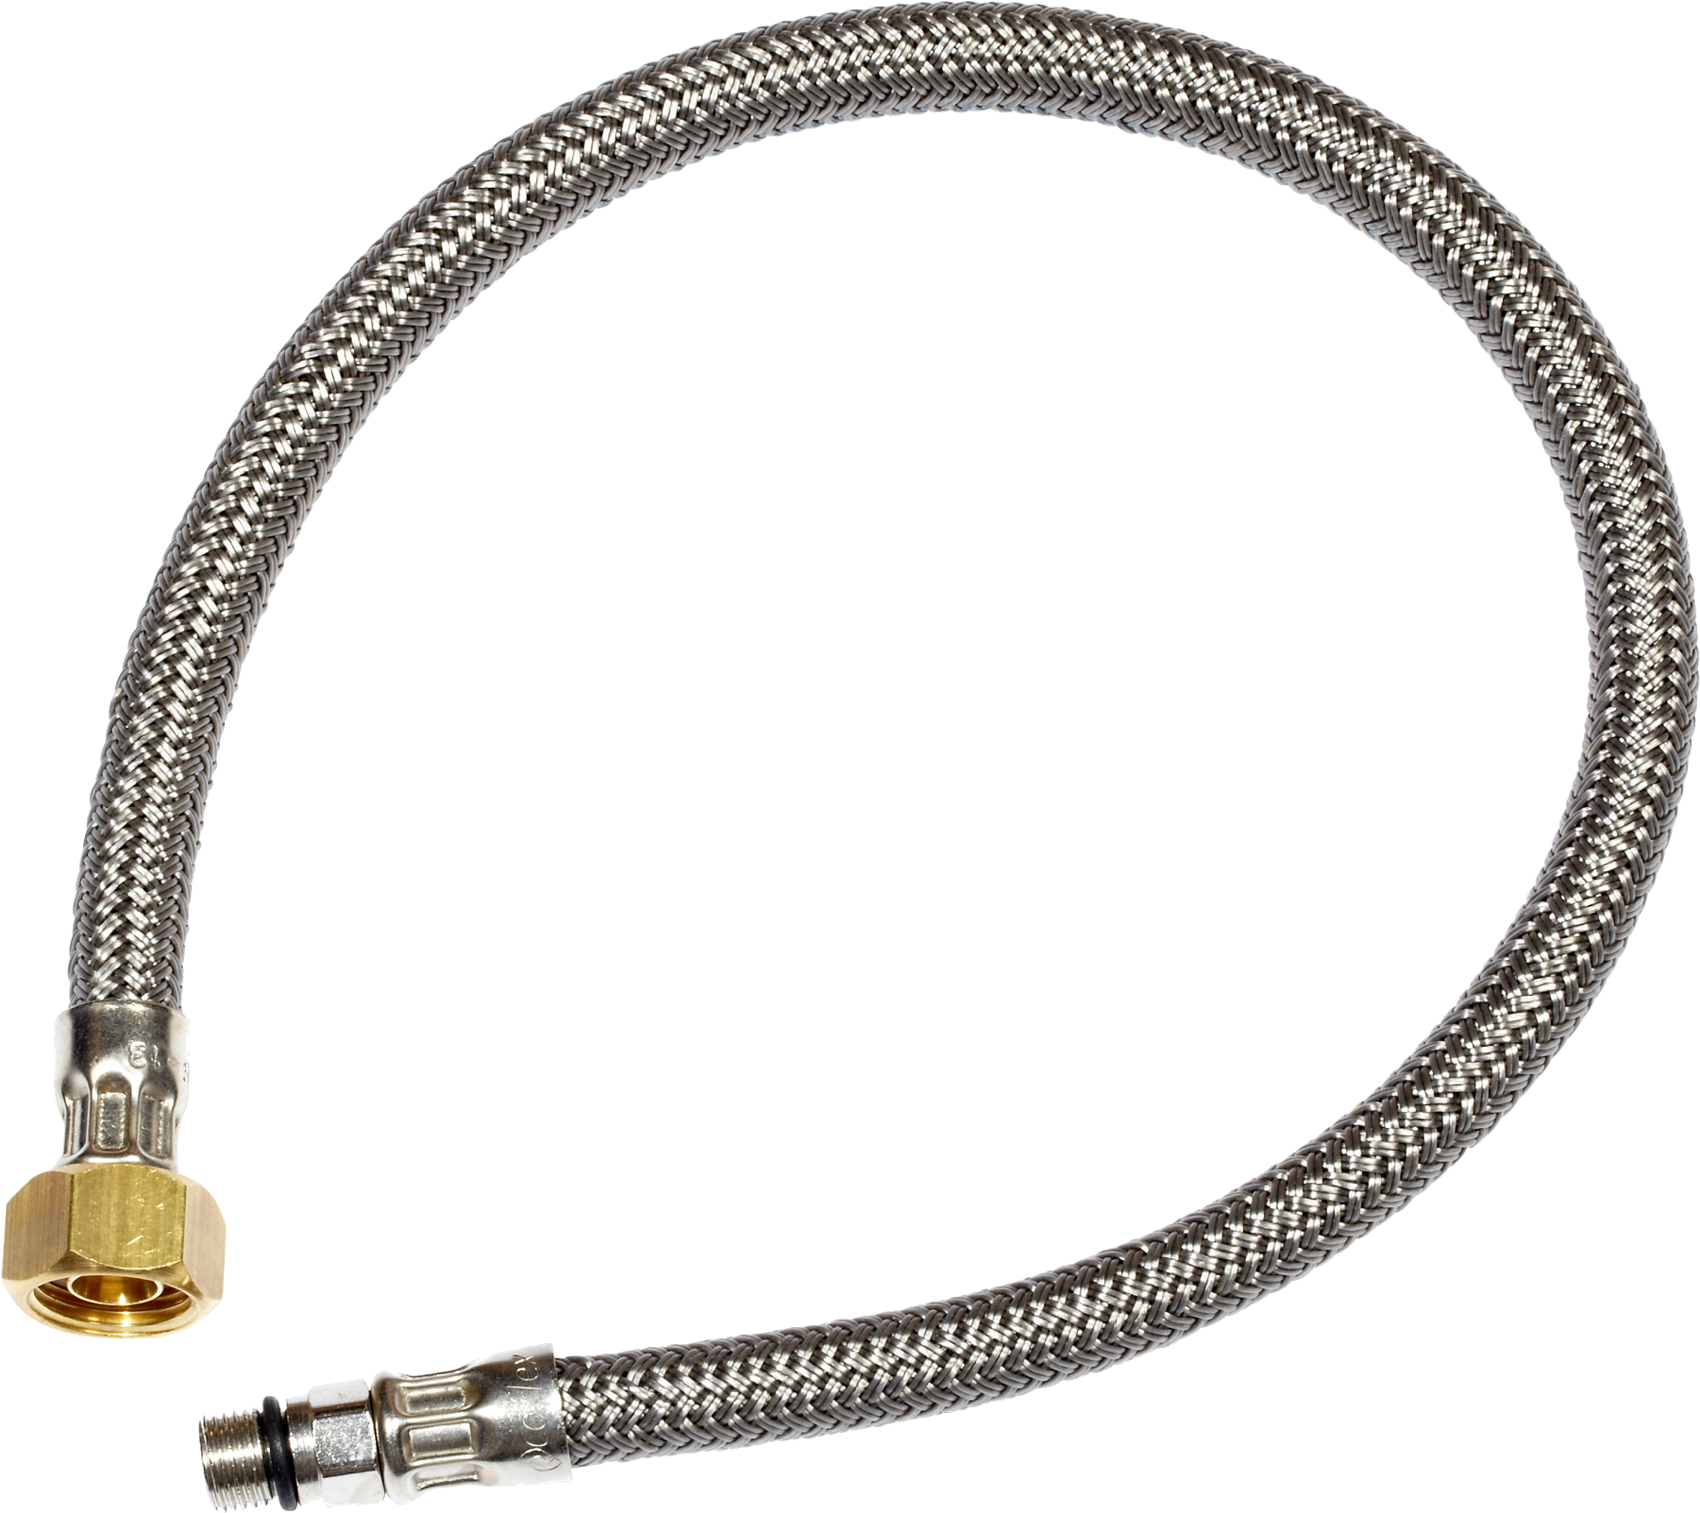 A Silver Braided Hose With A Gold Nut